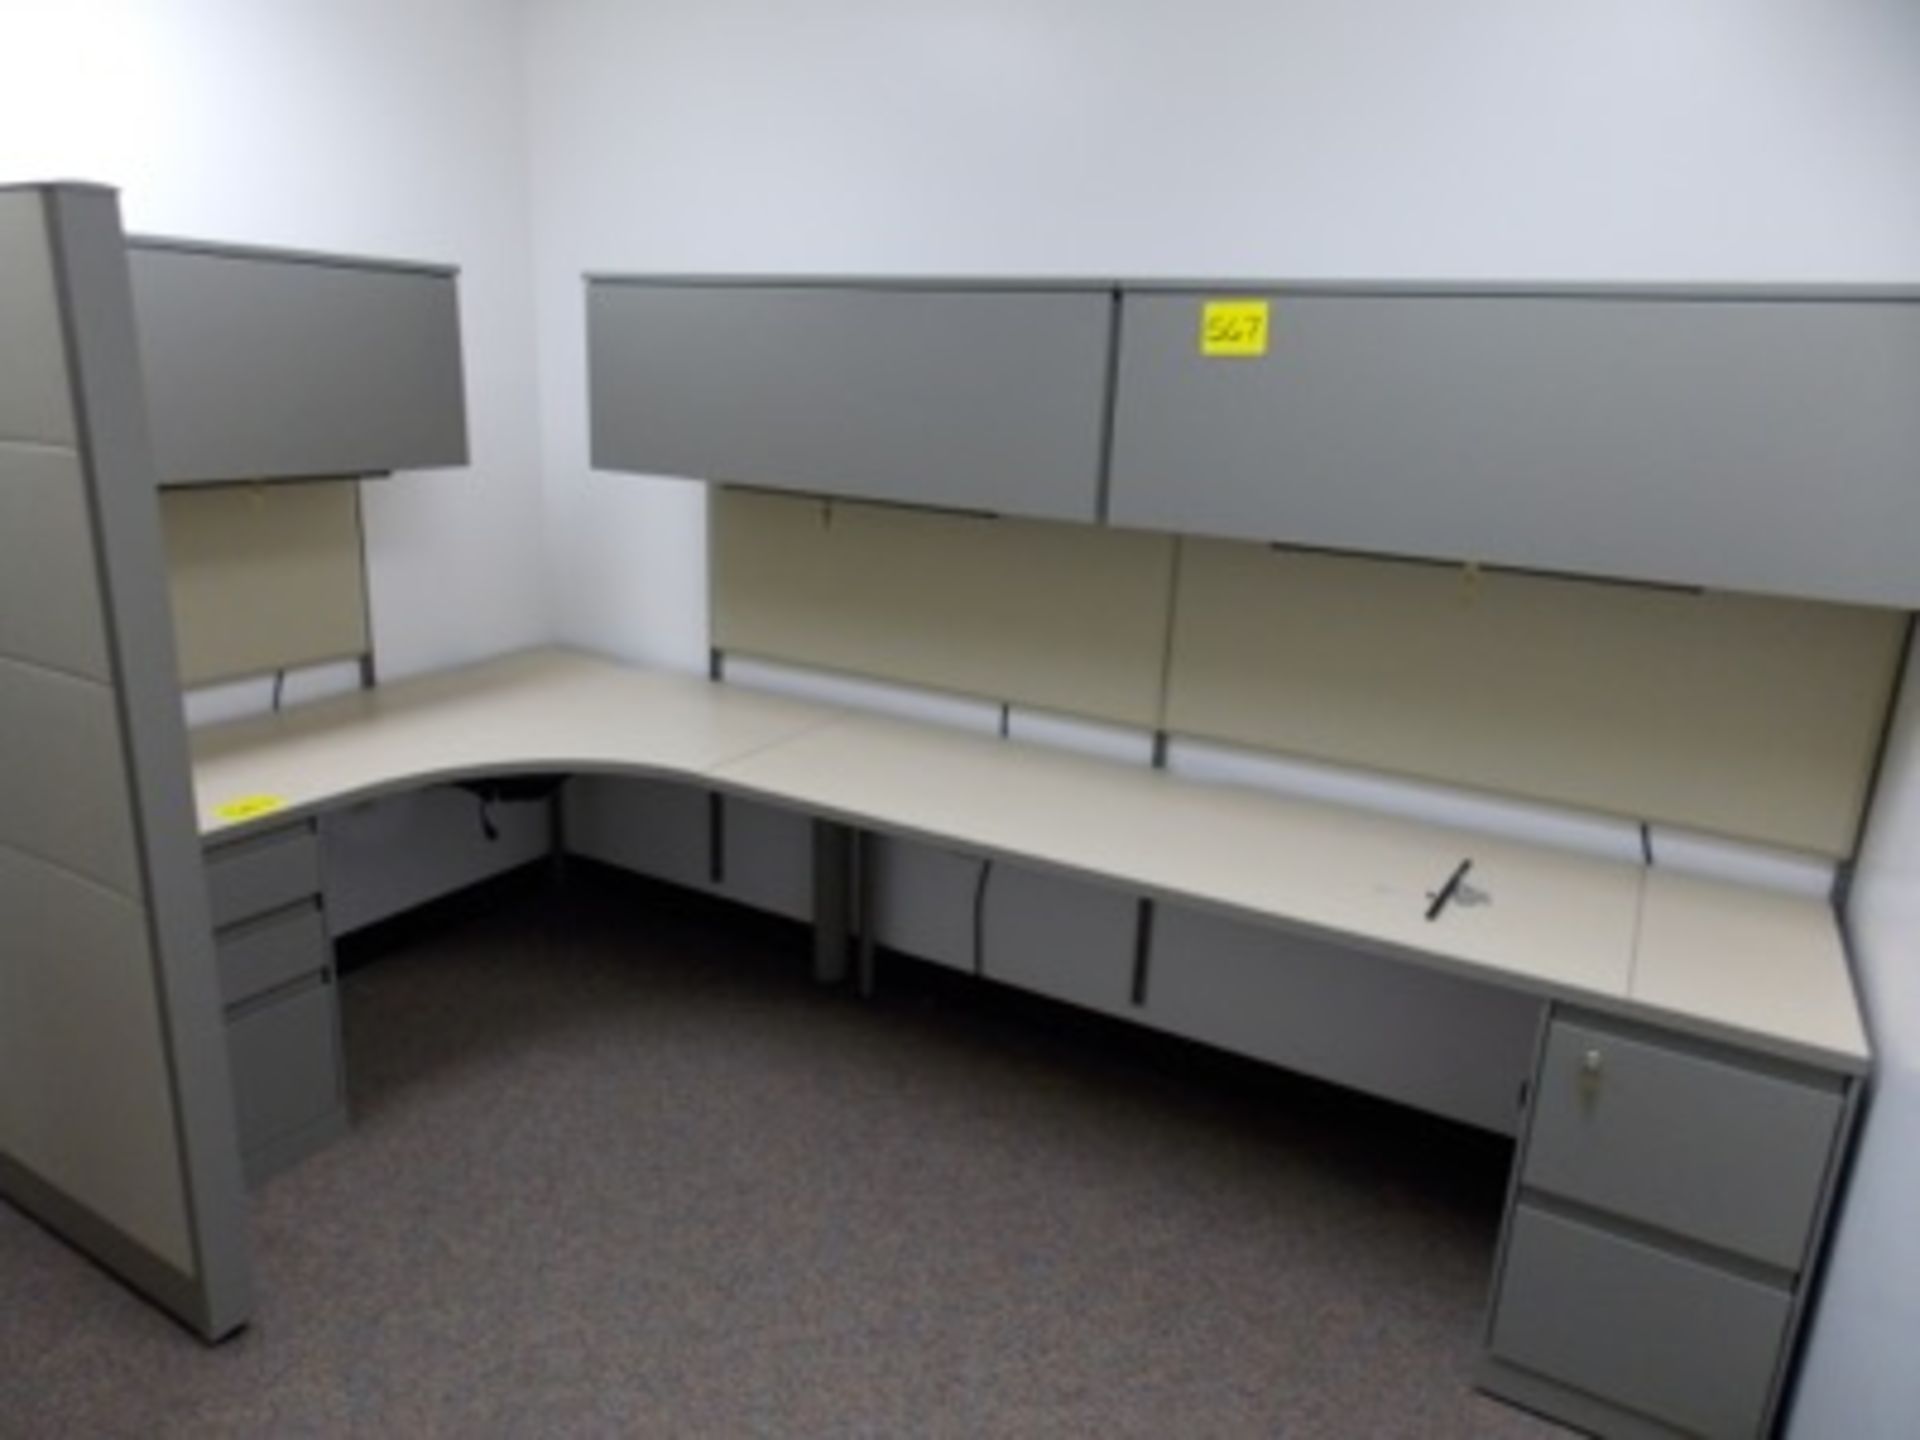 (Lot) Office Furniture in (8) Rooms - Image 2 of 8